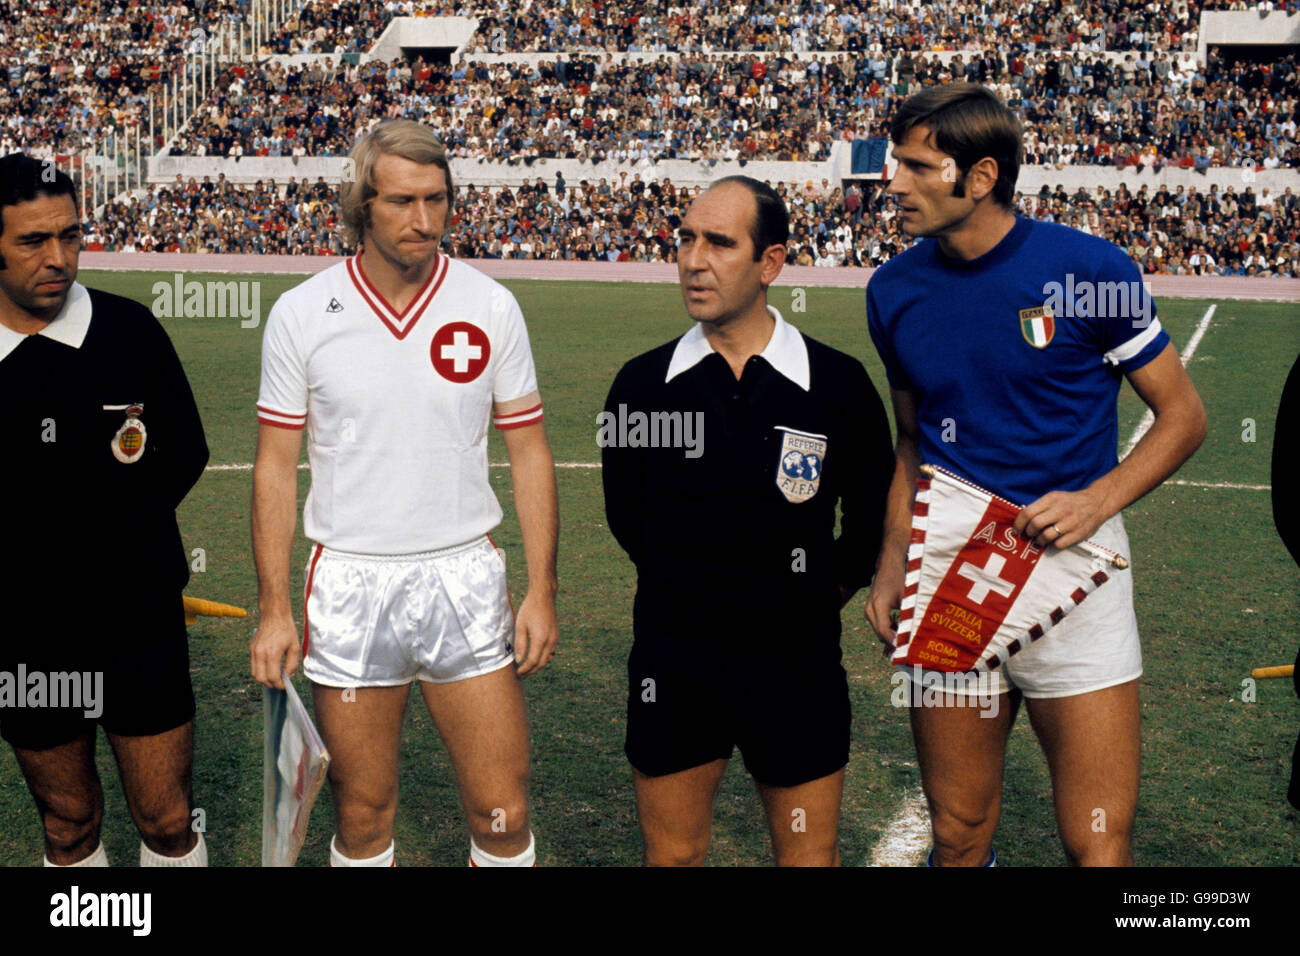 The captains of Switzerland, Karl Odermatt (white shirt), and Italy,  Giacinto Facchetti (blue shirt), greet each other before their match in Rome  Stock Photo - Alamy